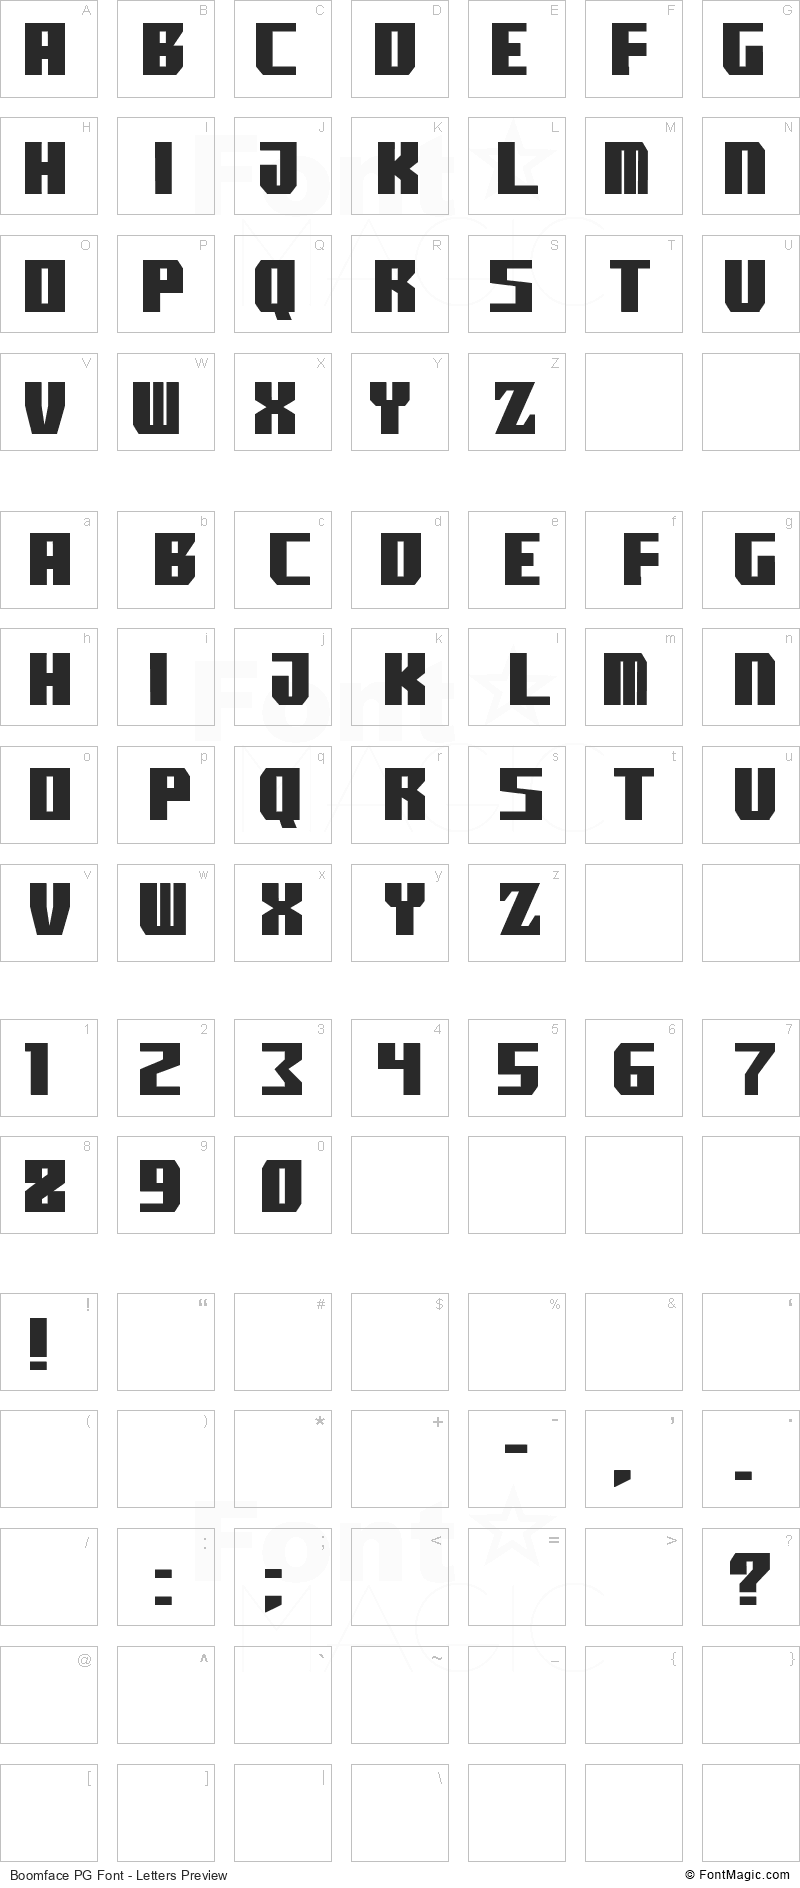 Boomface PG Font - All Latters Preview Chart